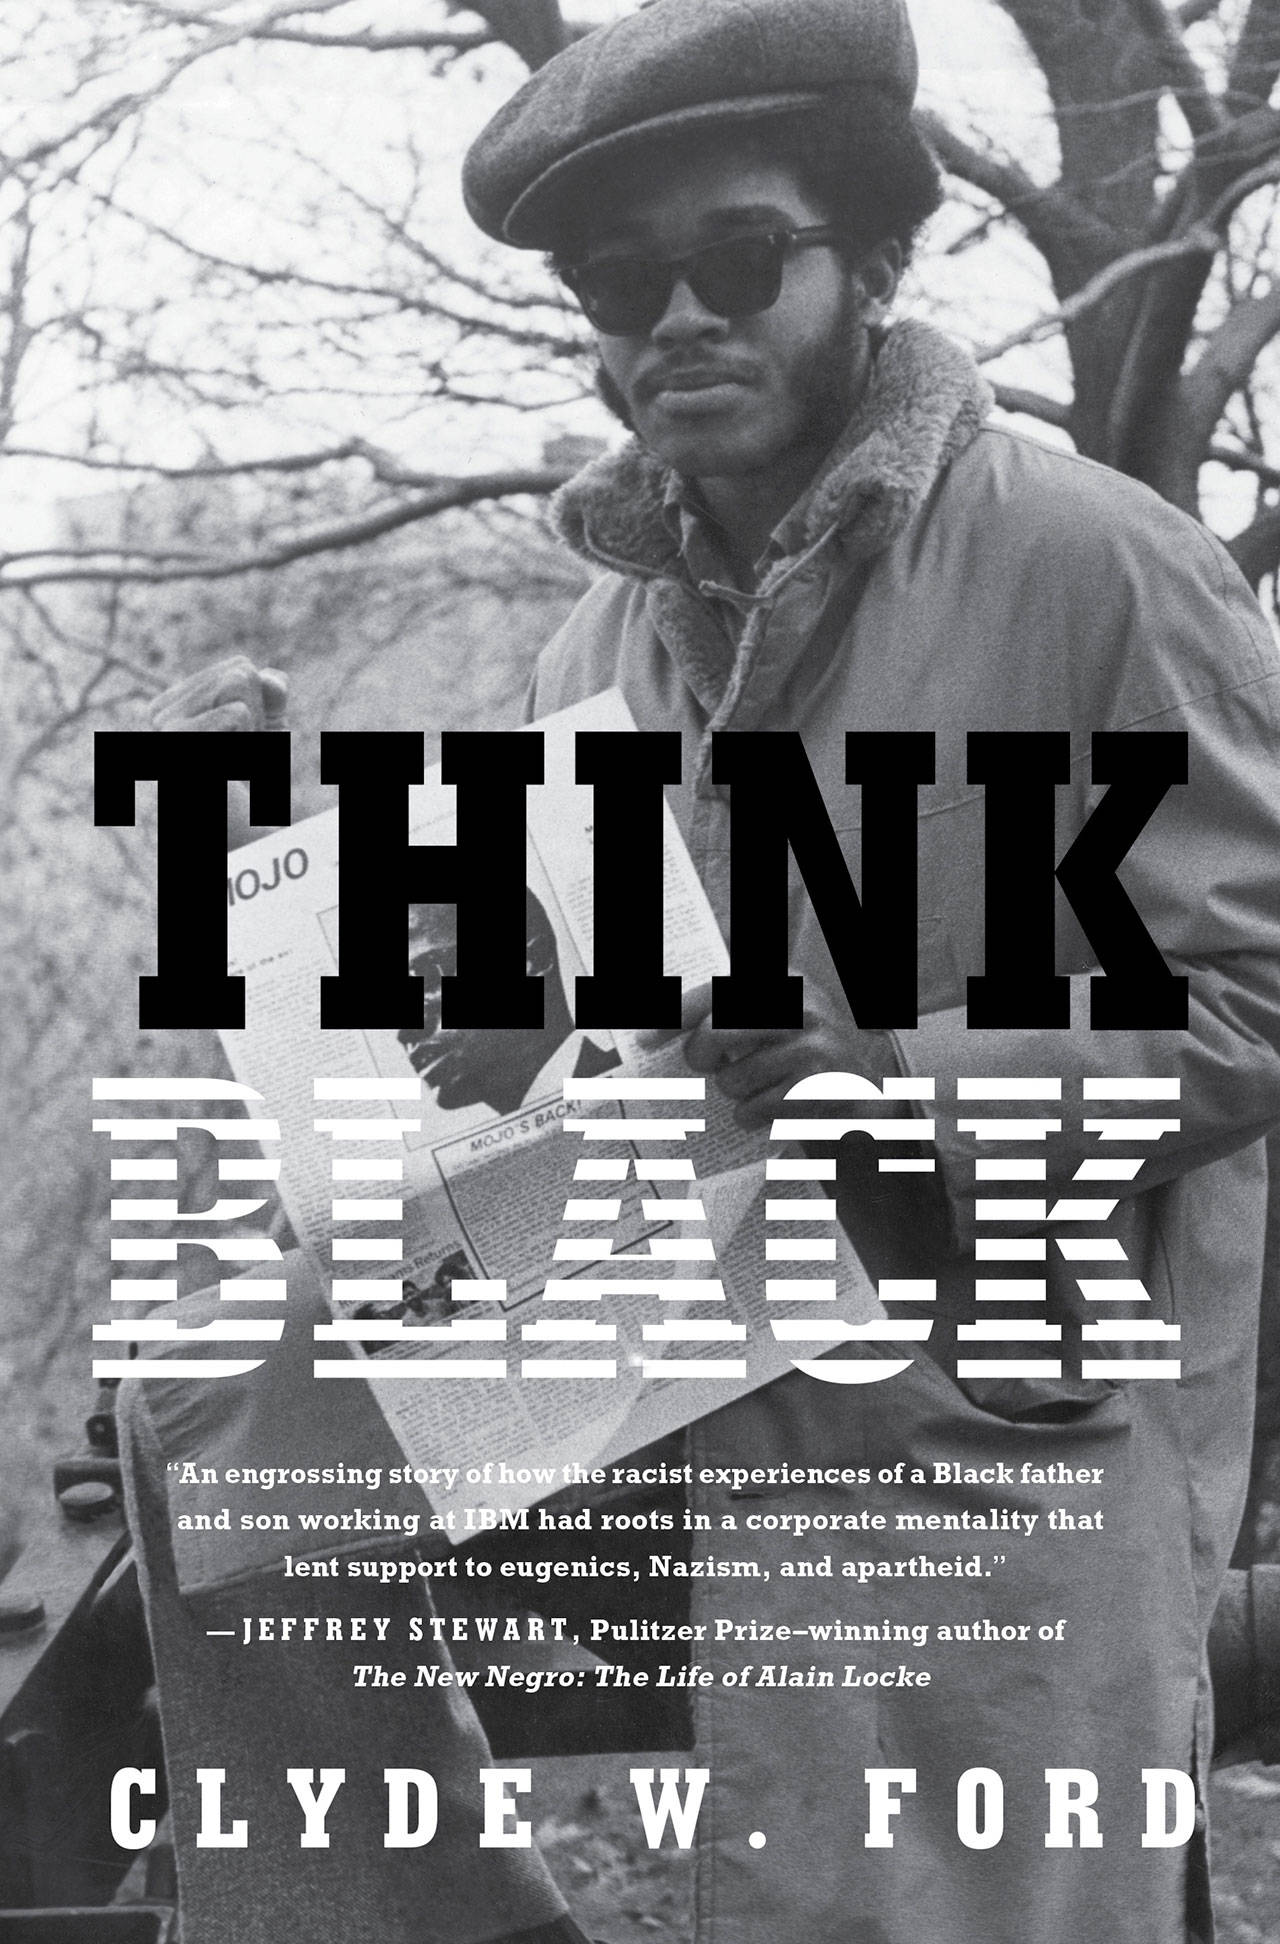 Image courtesy of Clyde Ford | “Think Black,” the new memoir by Washington author Clyde Ford, details the experiences of both he and his father while working at IBM.